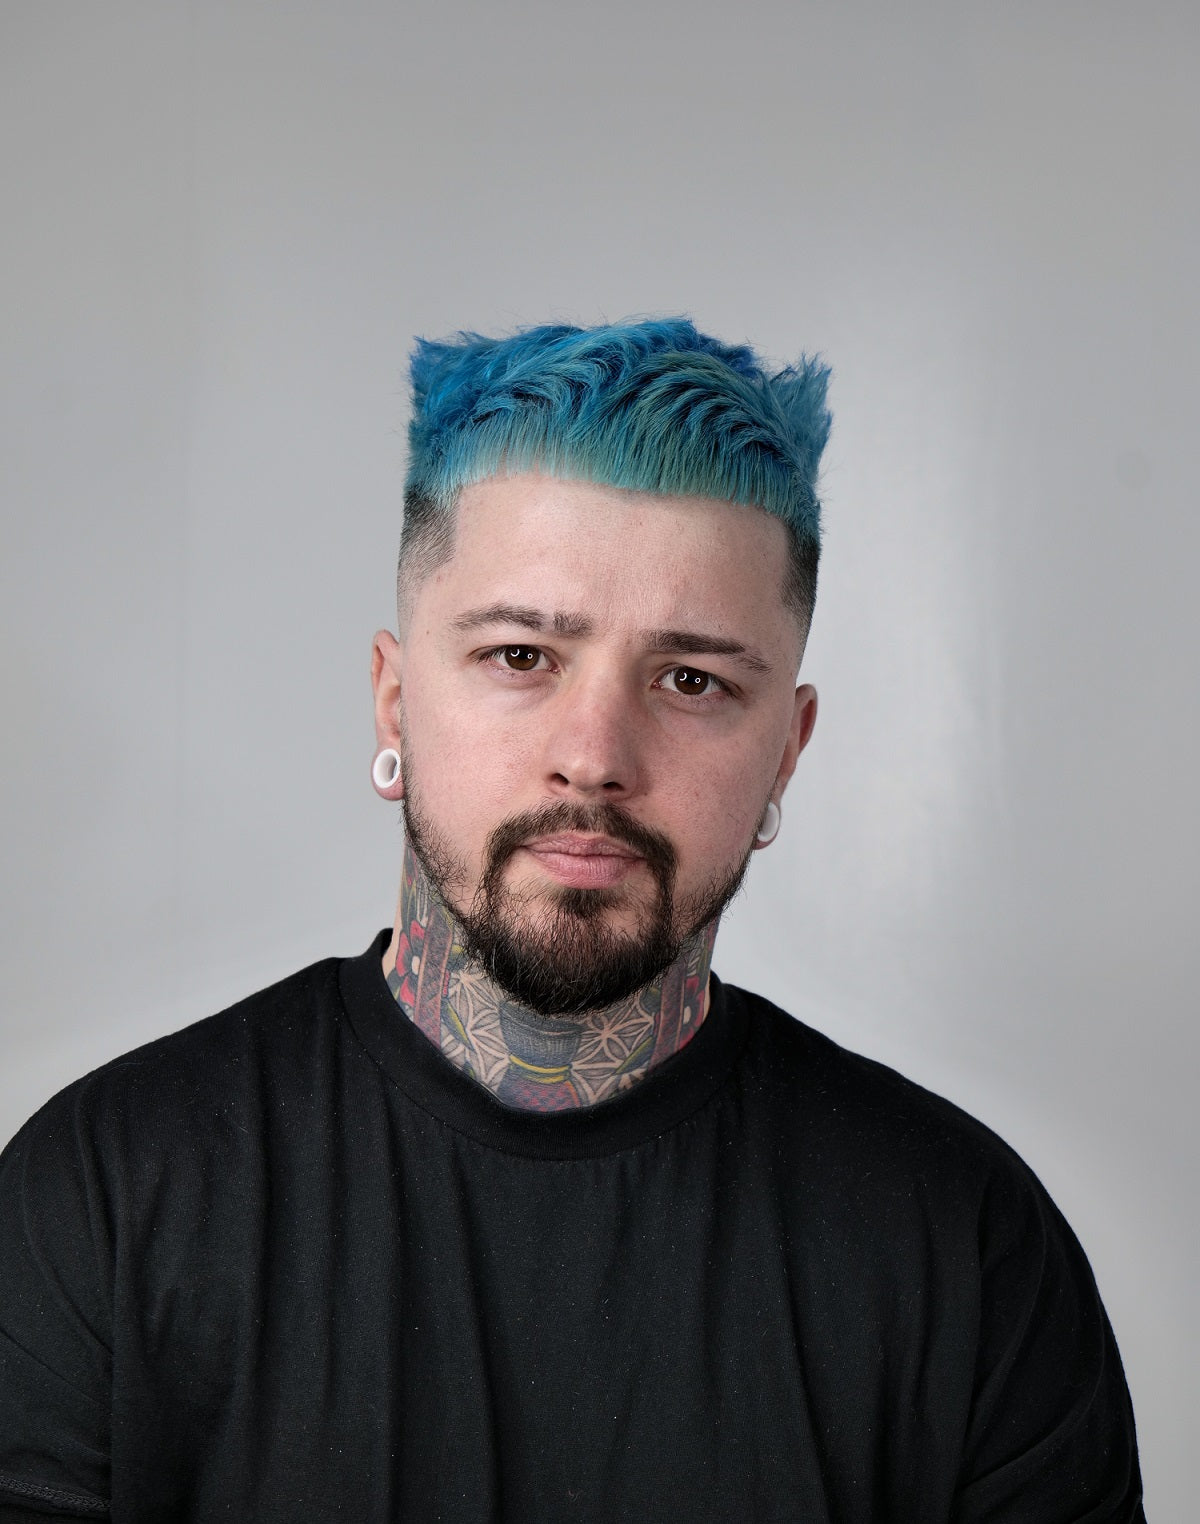 Kyle rowland, onesociety one society onesocietyshop beard care hair care best barber in my area best barber UK cool hair cut cool skin fade cool hair colour skilled barber barber of the year fade barbers